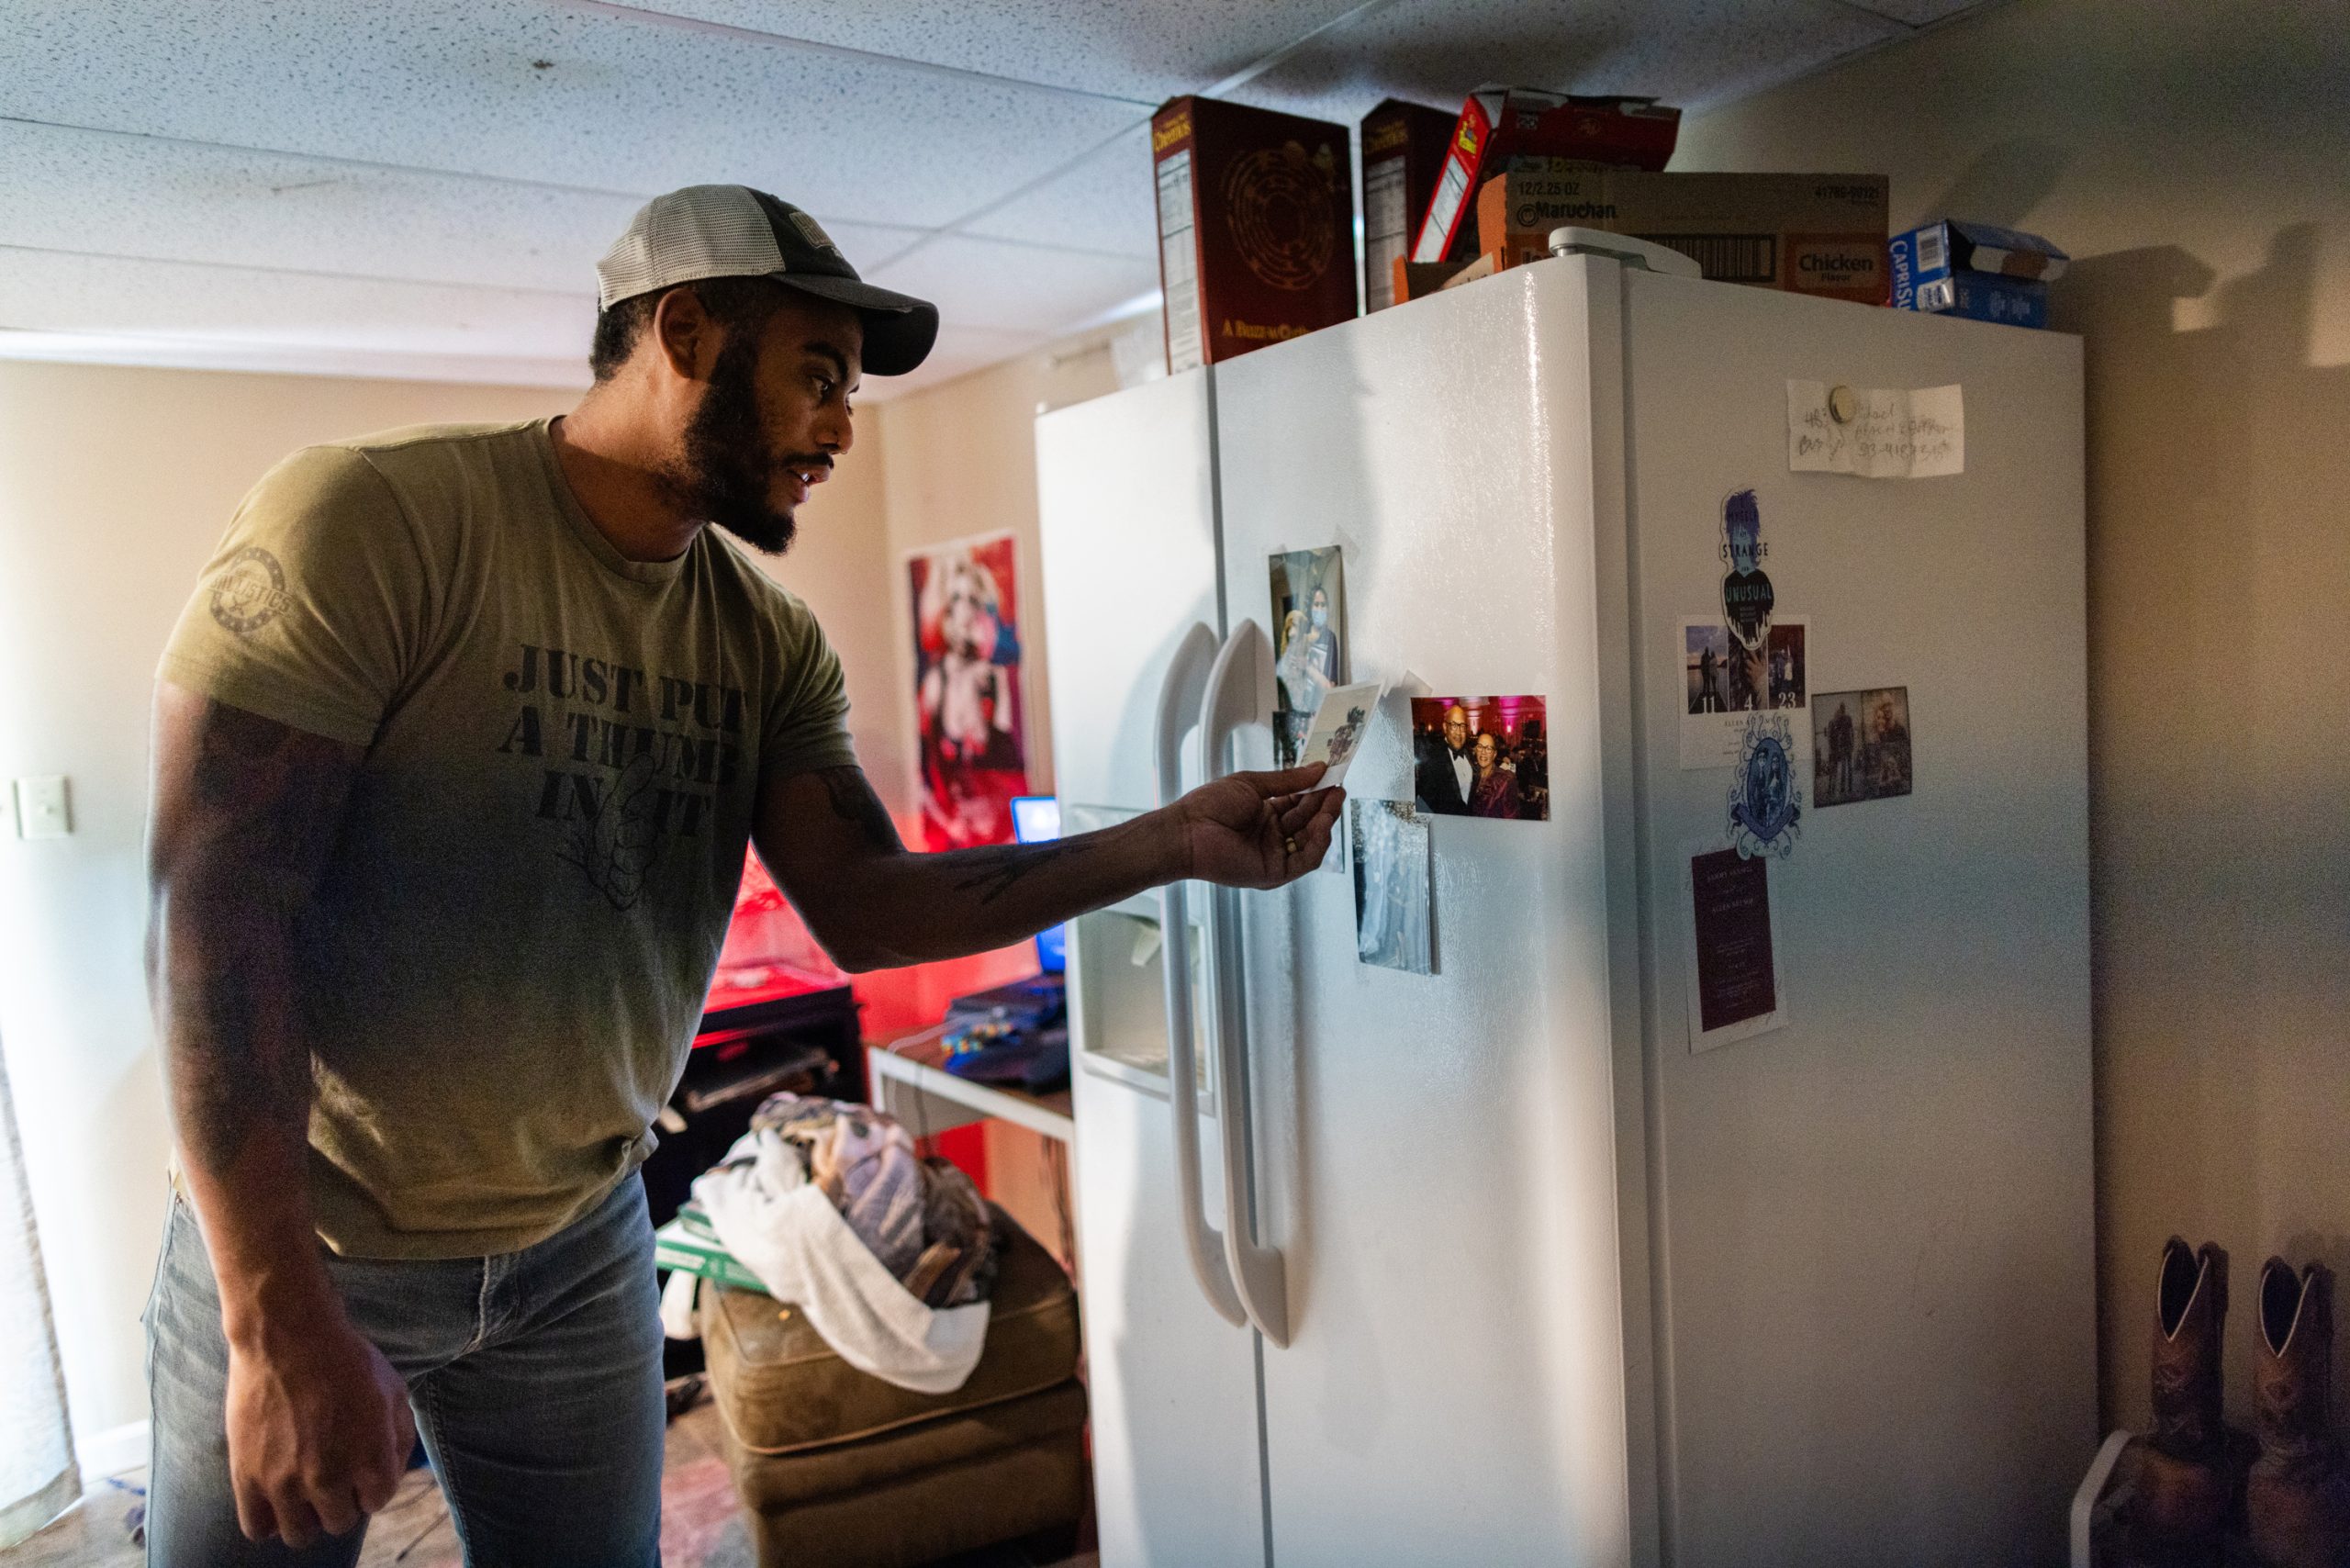 Aaron Morris, 27, pulls a photo of his family off the refrigerator